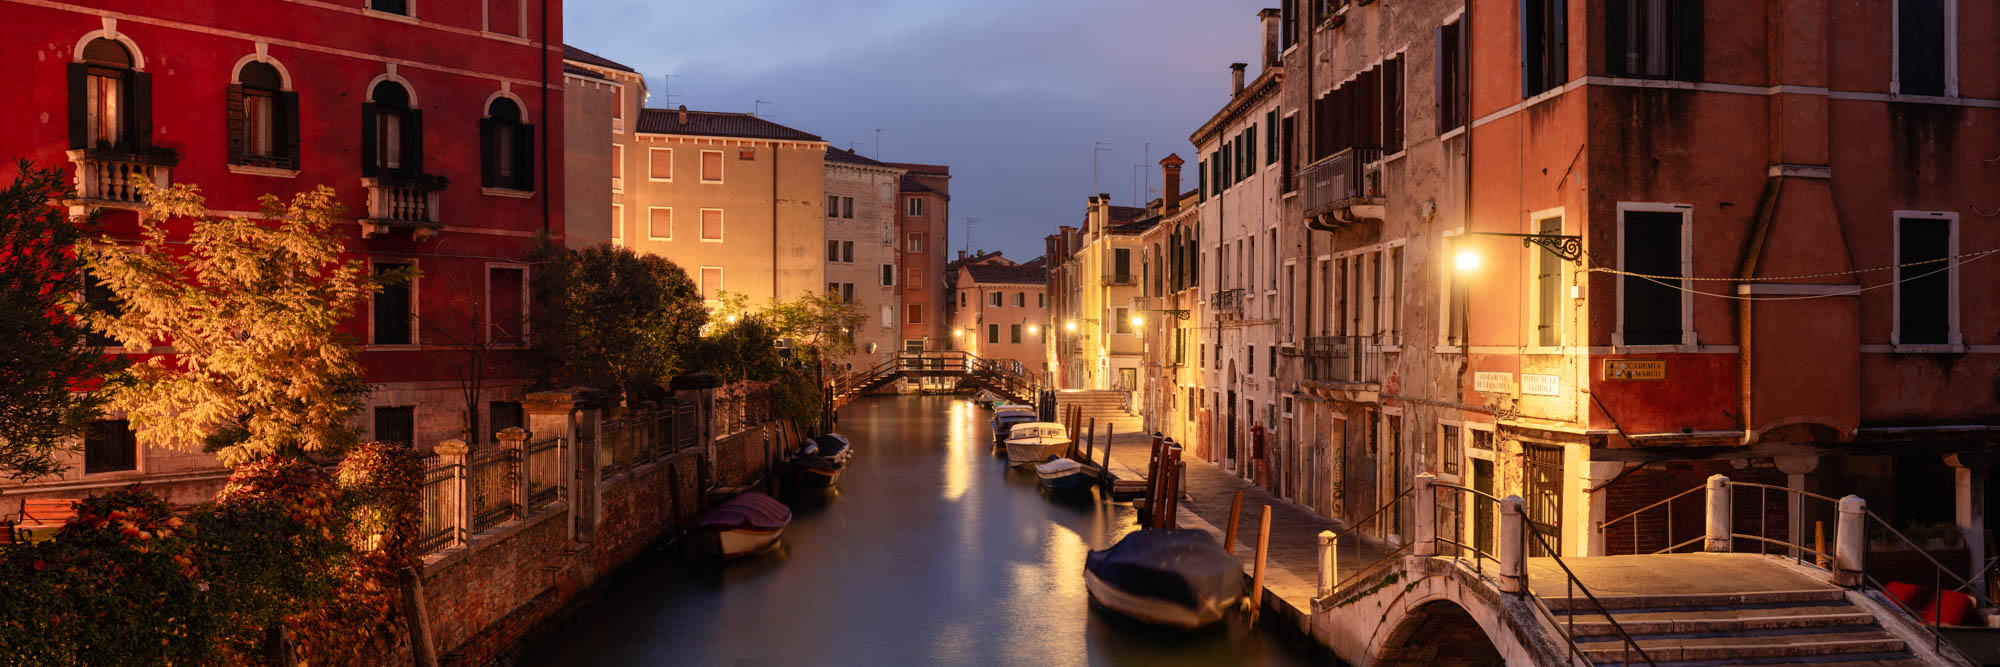 Panorama of a quiet canal in Venice at night in Italy